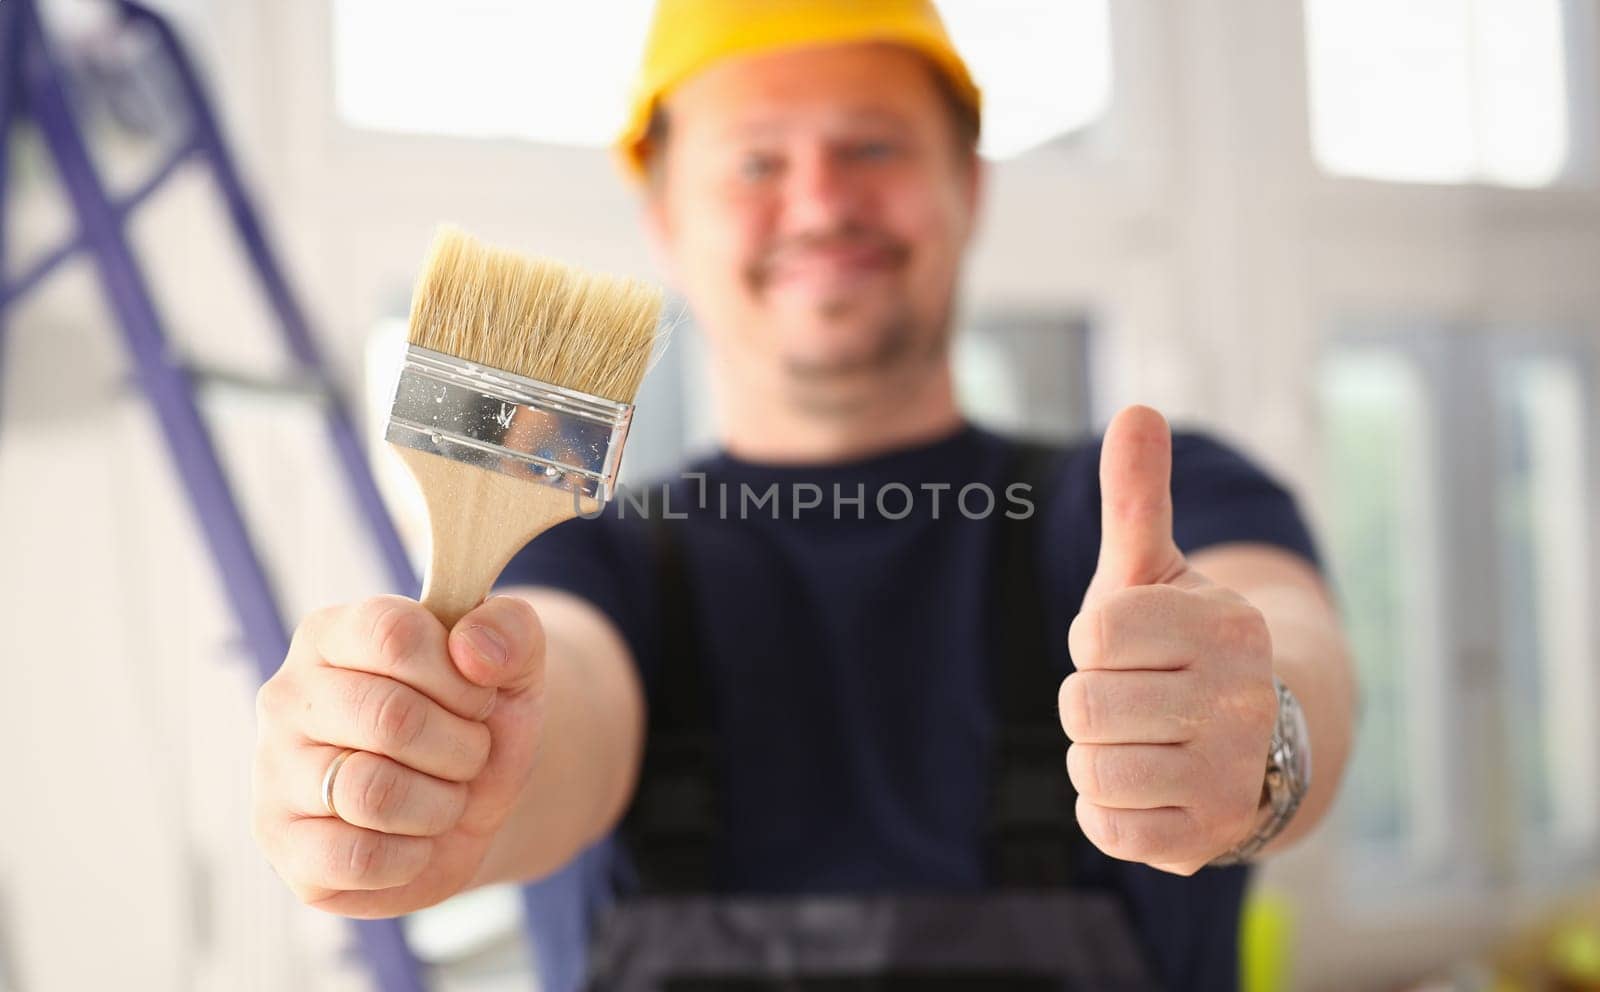 Arms of worker hold paint brush and show confirm sign with thumb up closeup. Manual job DIY inspiration joinery startup idea fix shop hard hat industrial education profession career concept